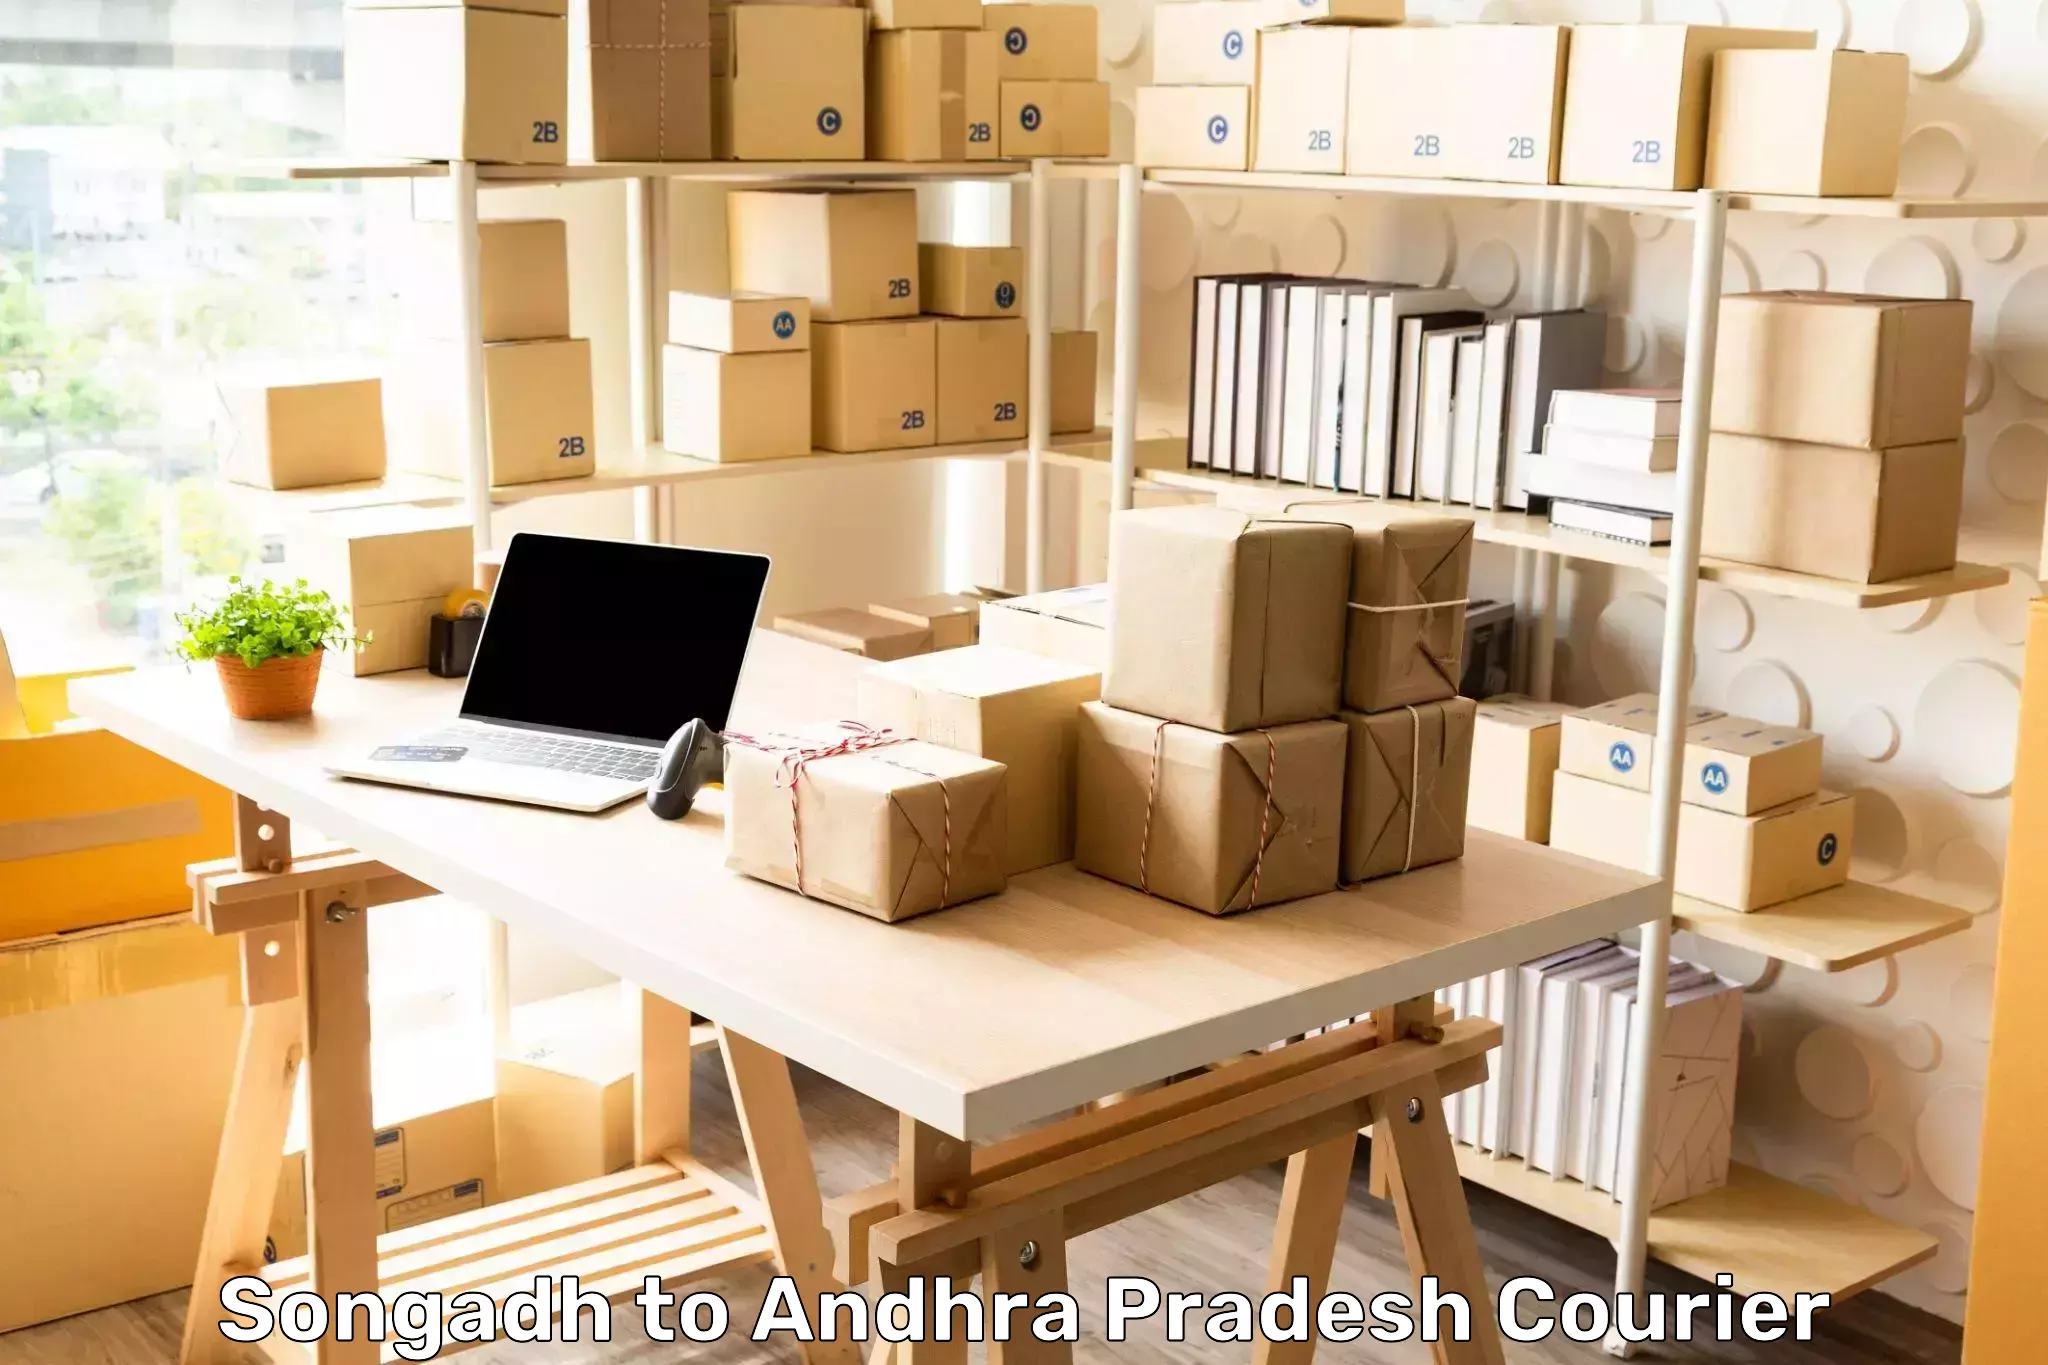 Round-the-clock parcel delivery in Songadh to Puttur Tirupati